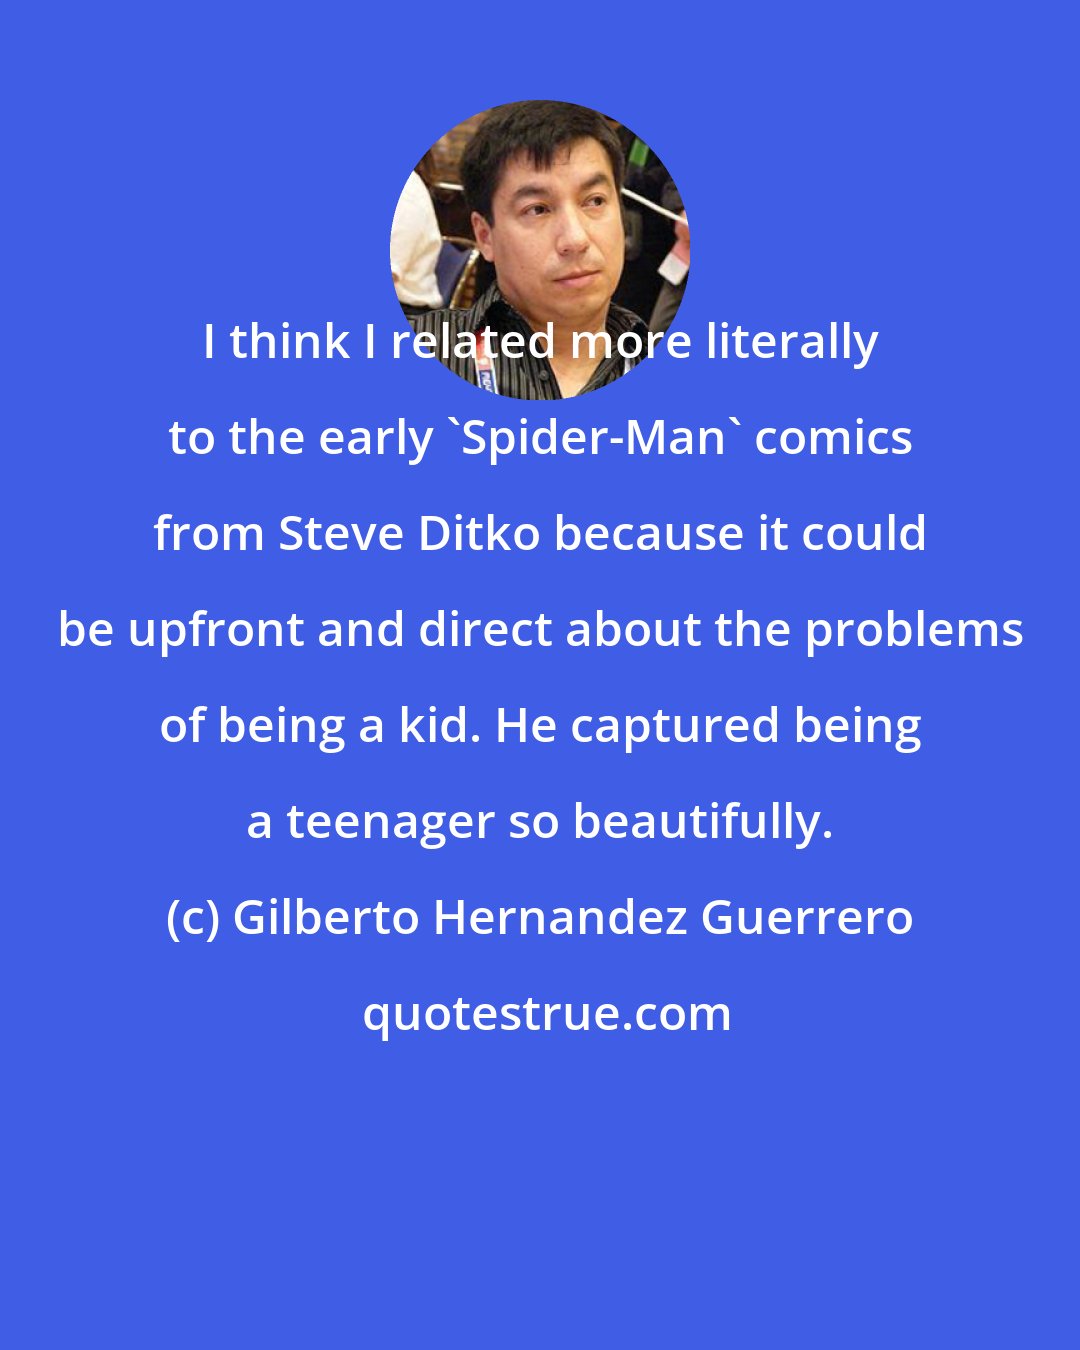 Gilberto Hernandez Guerrero: I think I related more literally to the early 'Spider-Man' comics from Steve Ditko because it could be upfront and direct about the problems of being a kid. He captured being a teenager so beautifully.